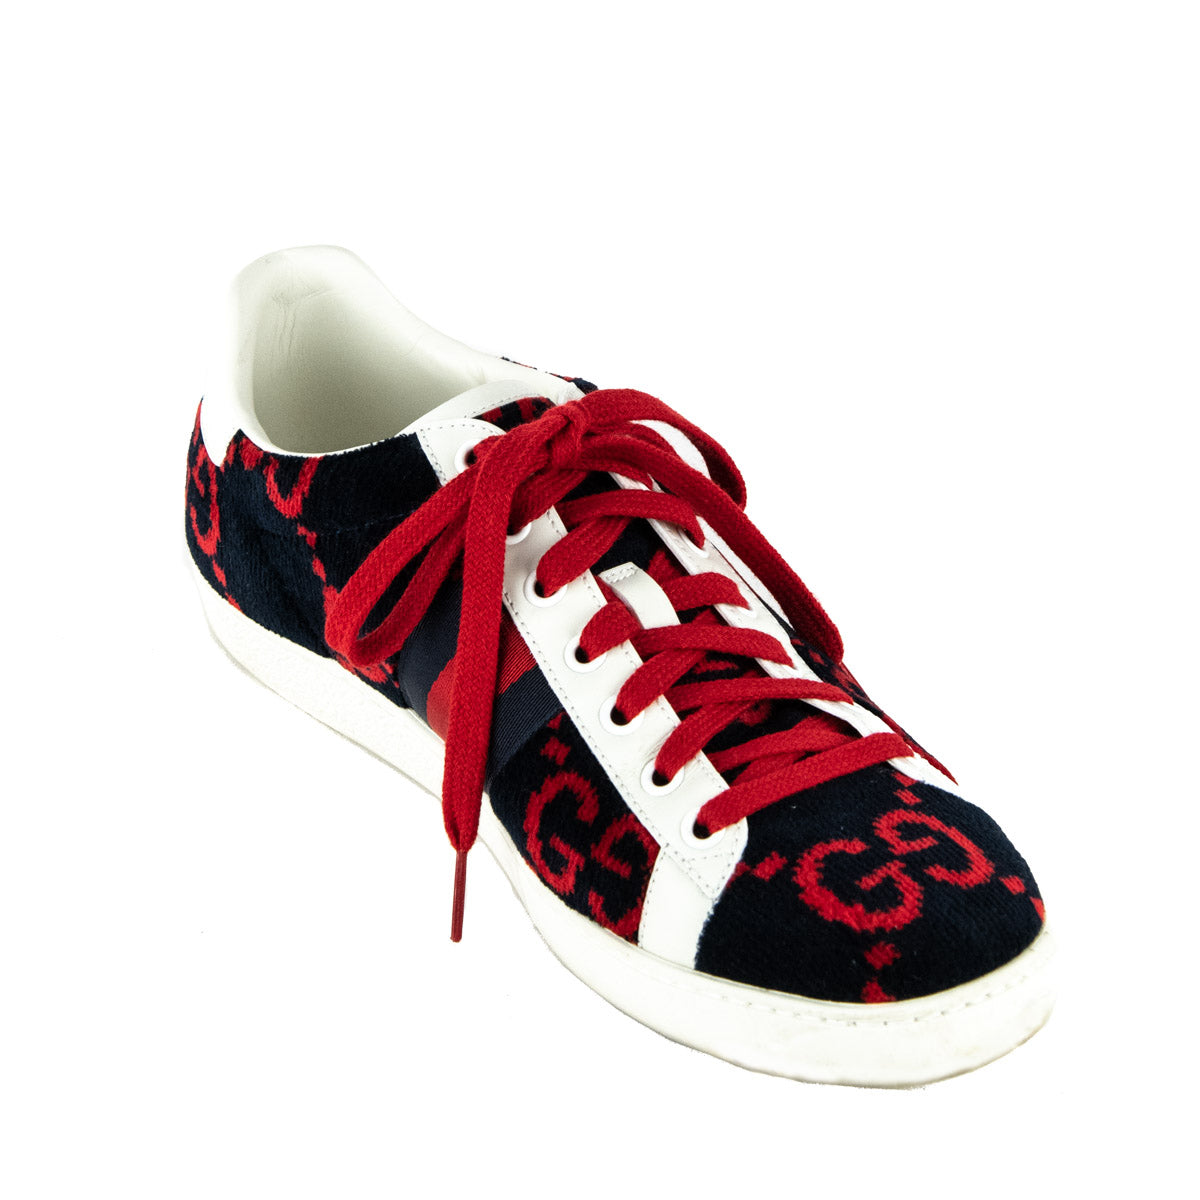 Gucci Navy & Red Velvet GG Ace Sneakers - Preowned Gucci Sneakers CA